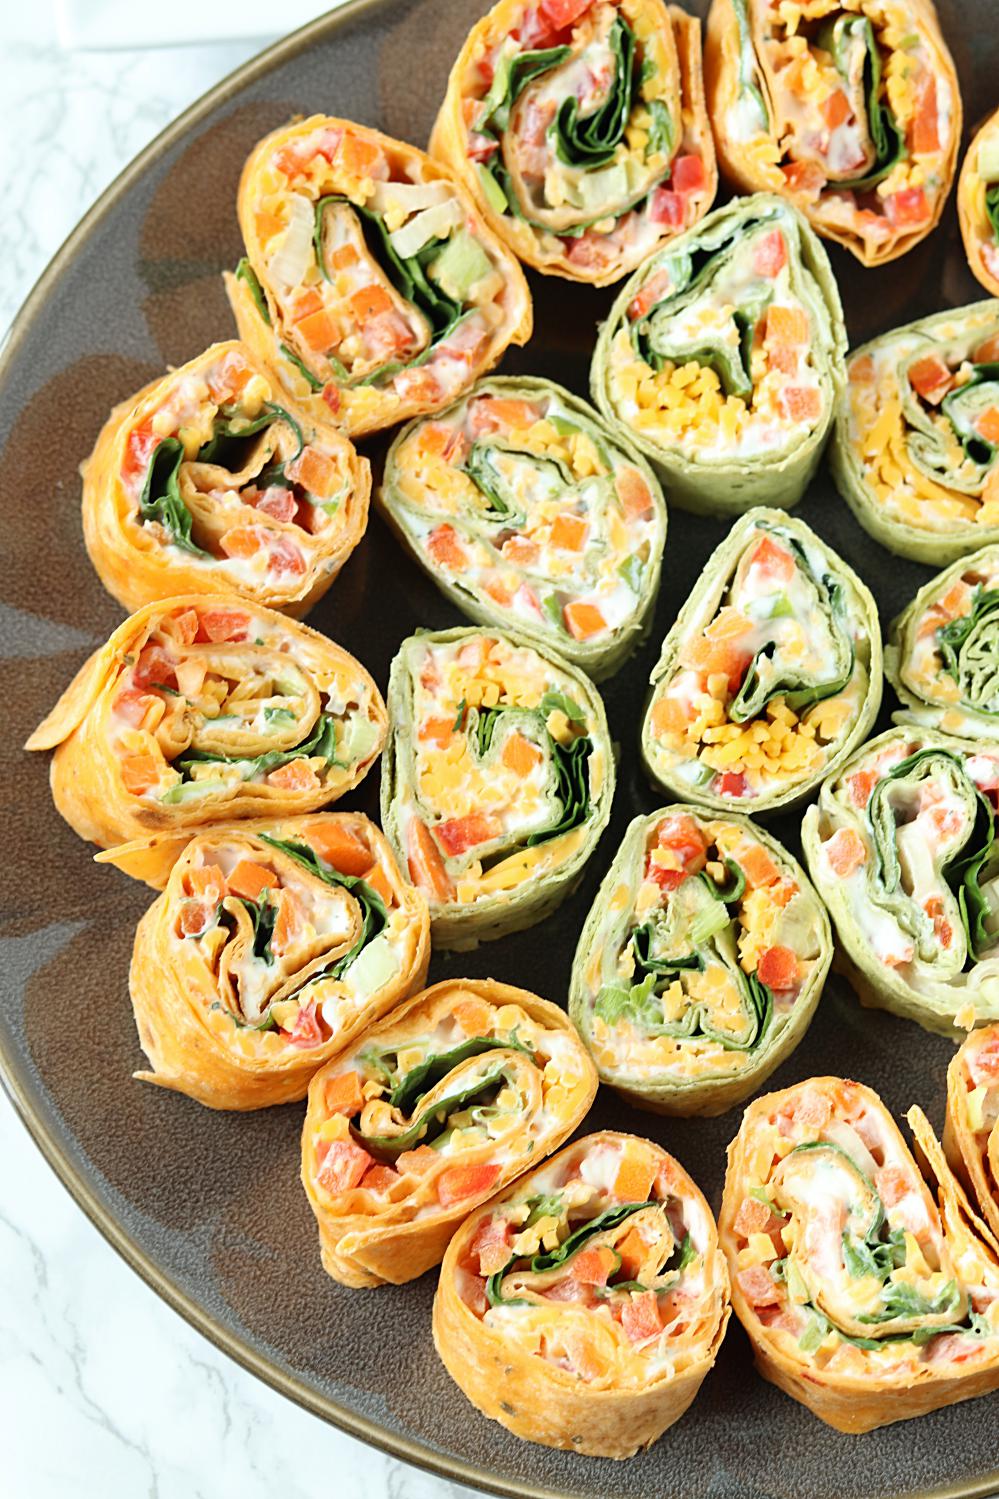 This Veggie Pinwheels Party Appetizer is perfect for tailgating, holiday get togethers, or potlucks. Farmers market veggies, ranch cream cheese spread, and shredded cheese wrapped in tortillas and cut into small bites for snacking!